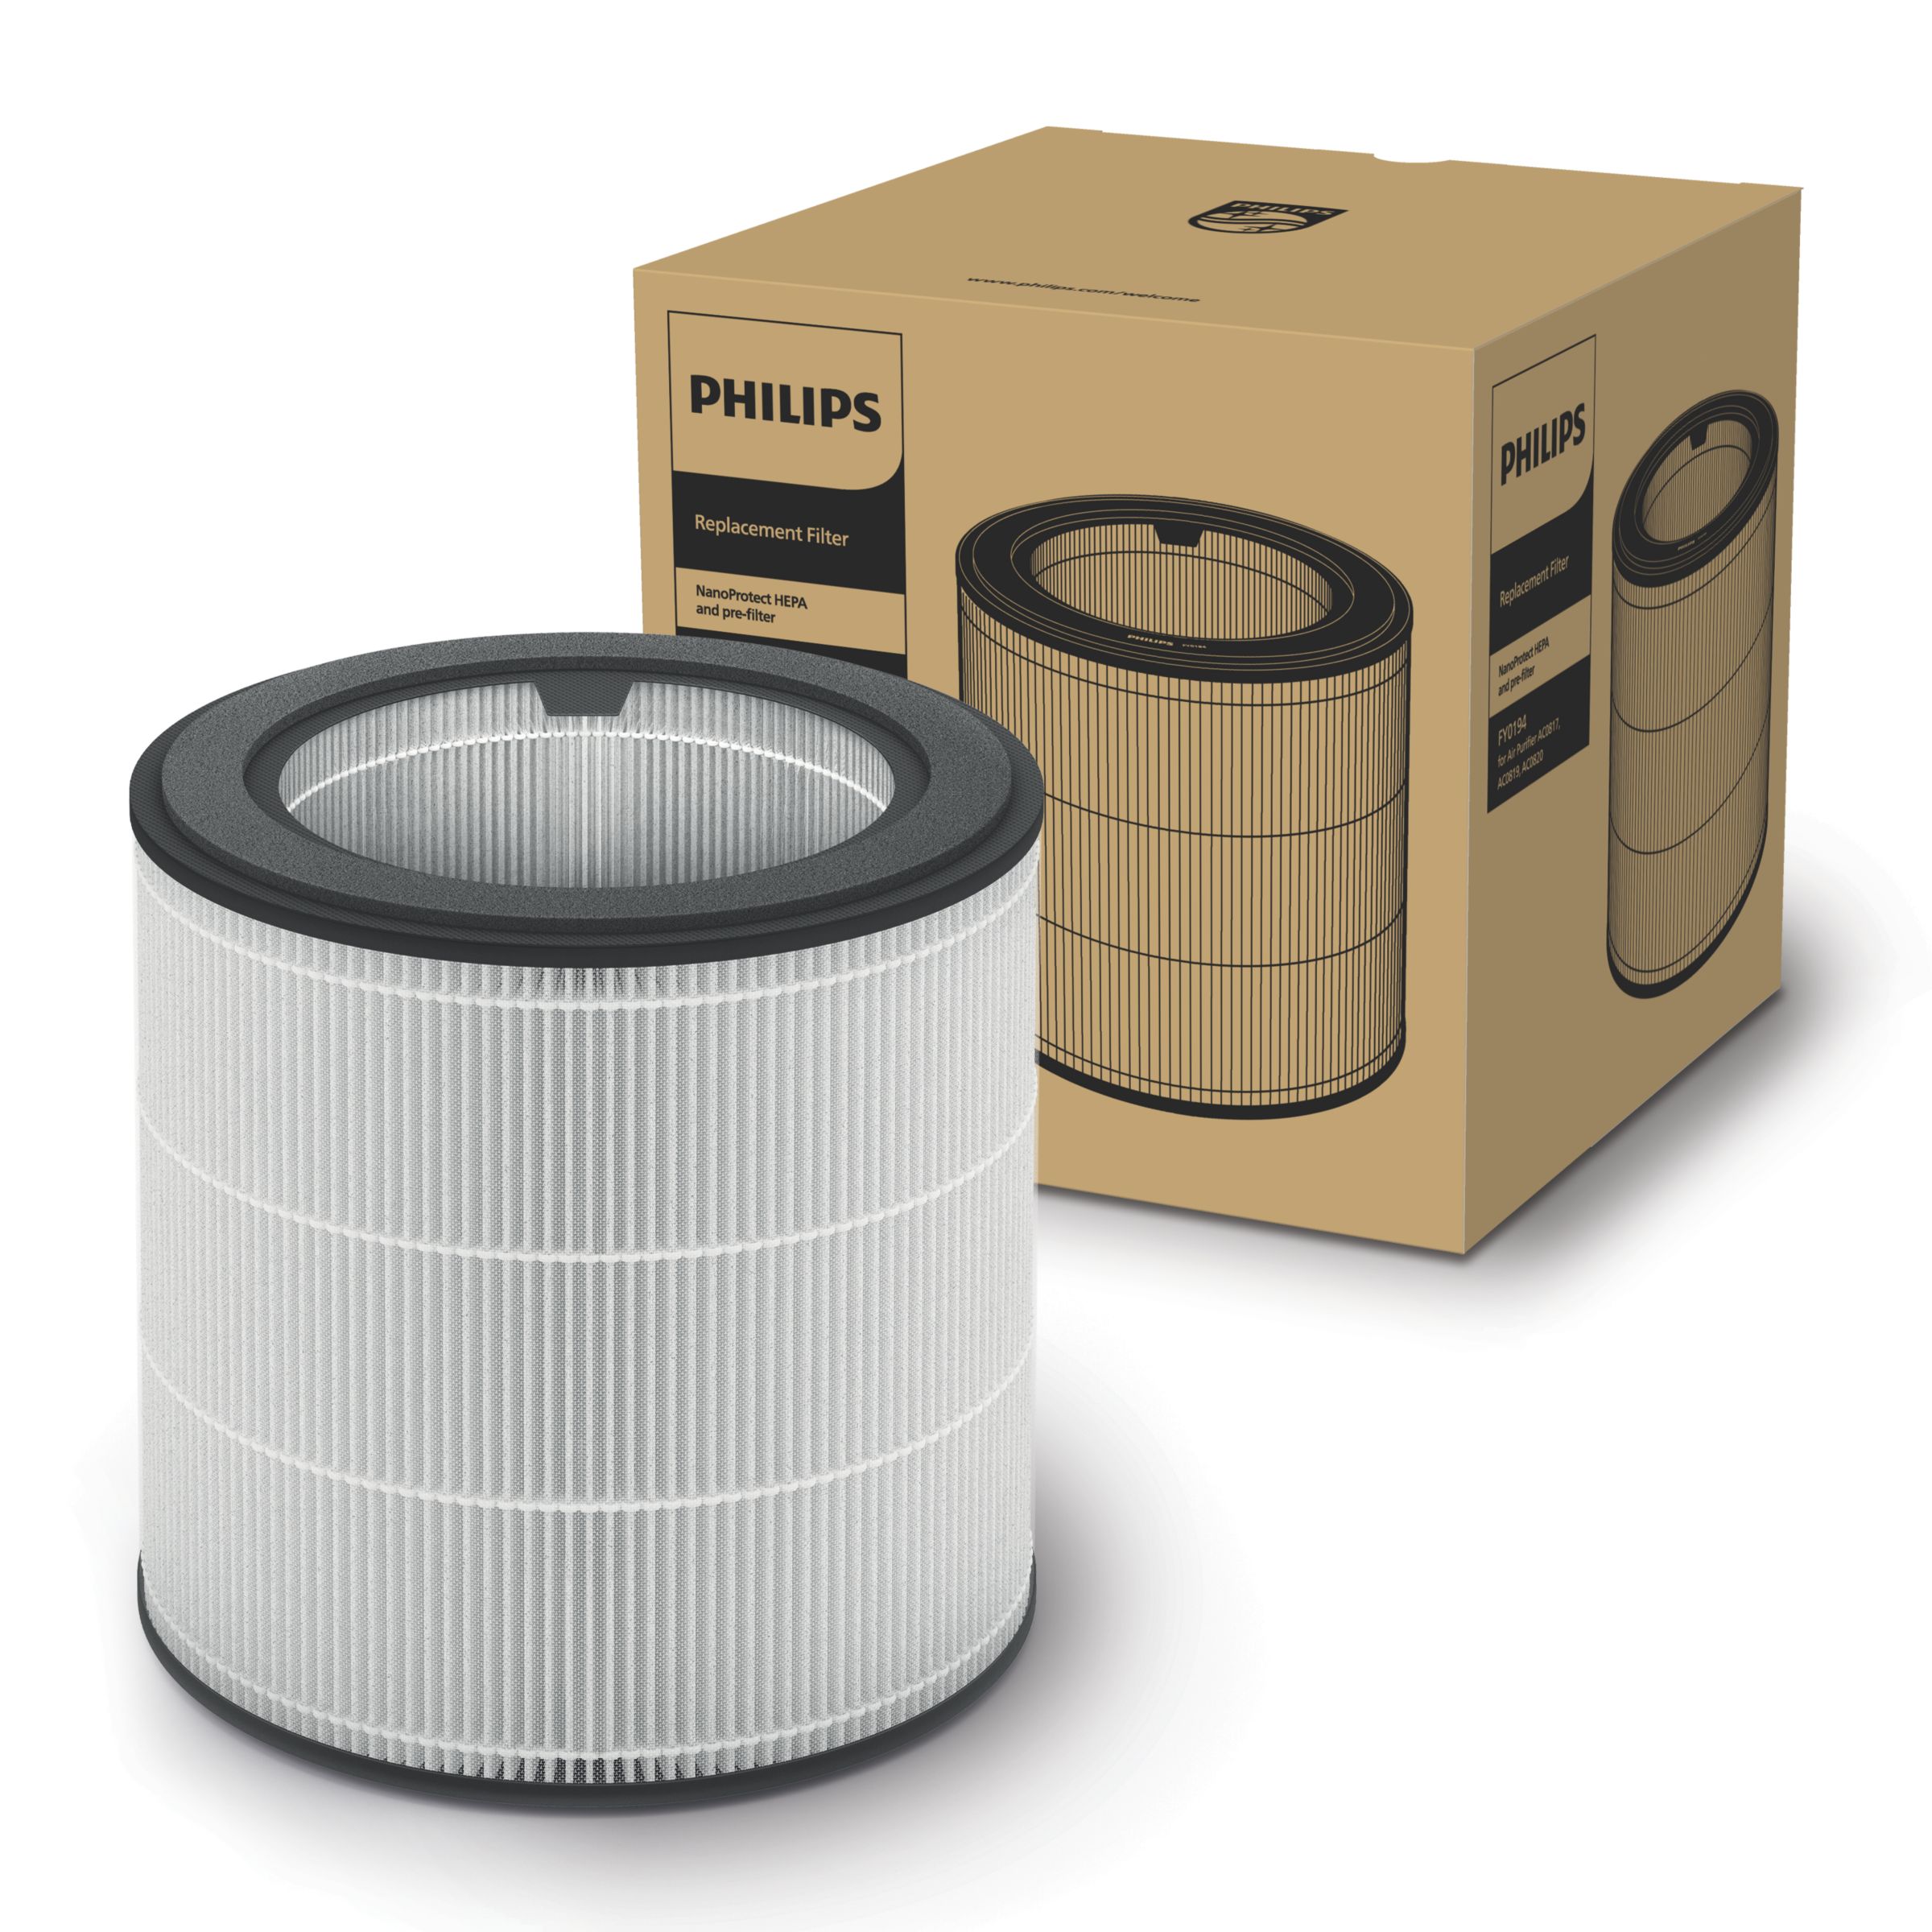 Philips Genuine Replacement Filter - HEPA NanoProtect - FY0194/30